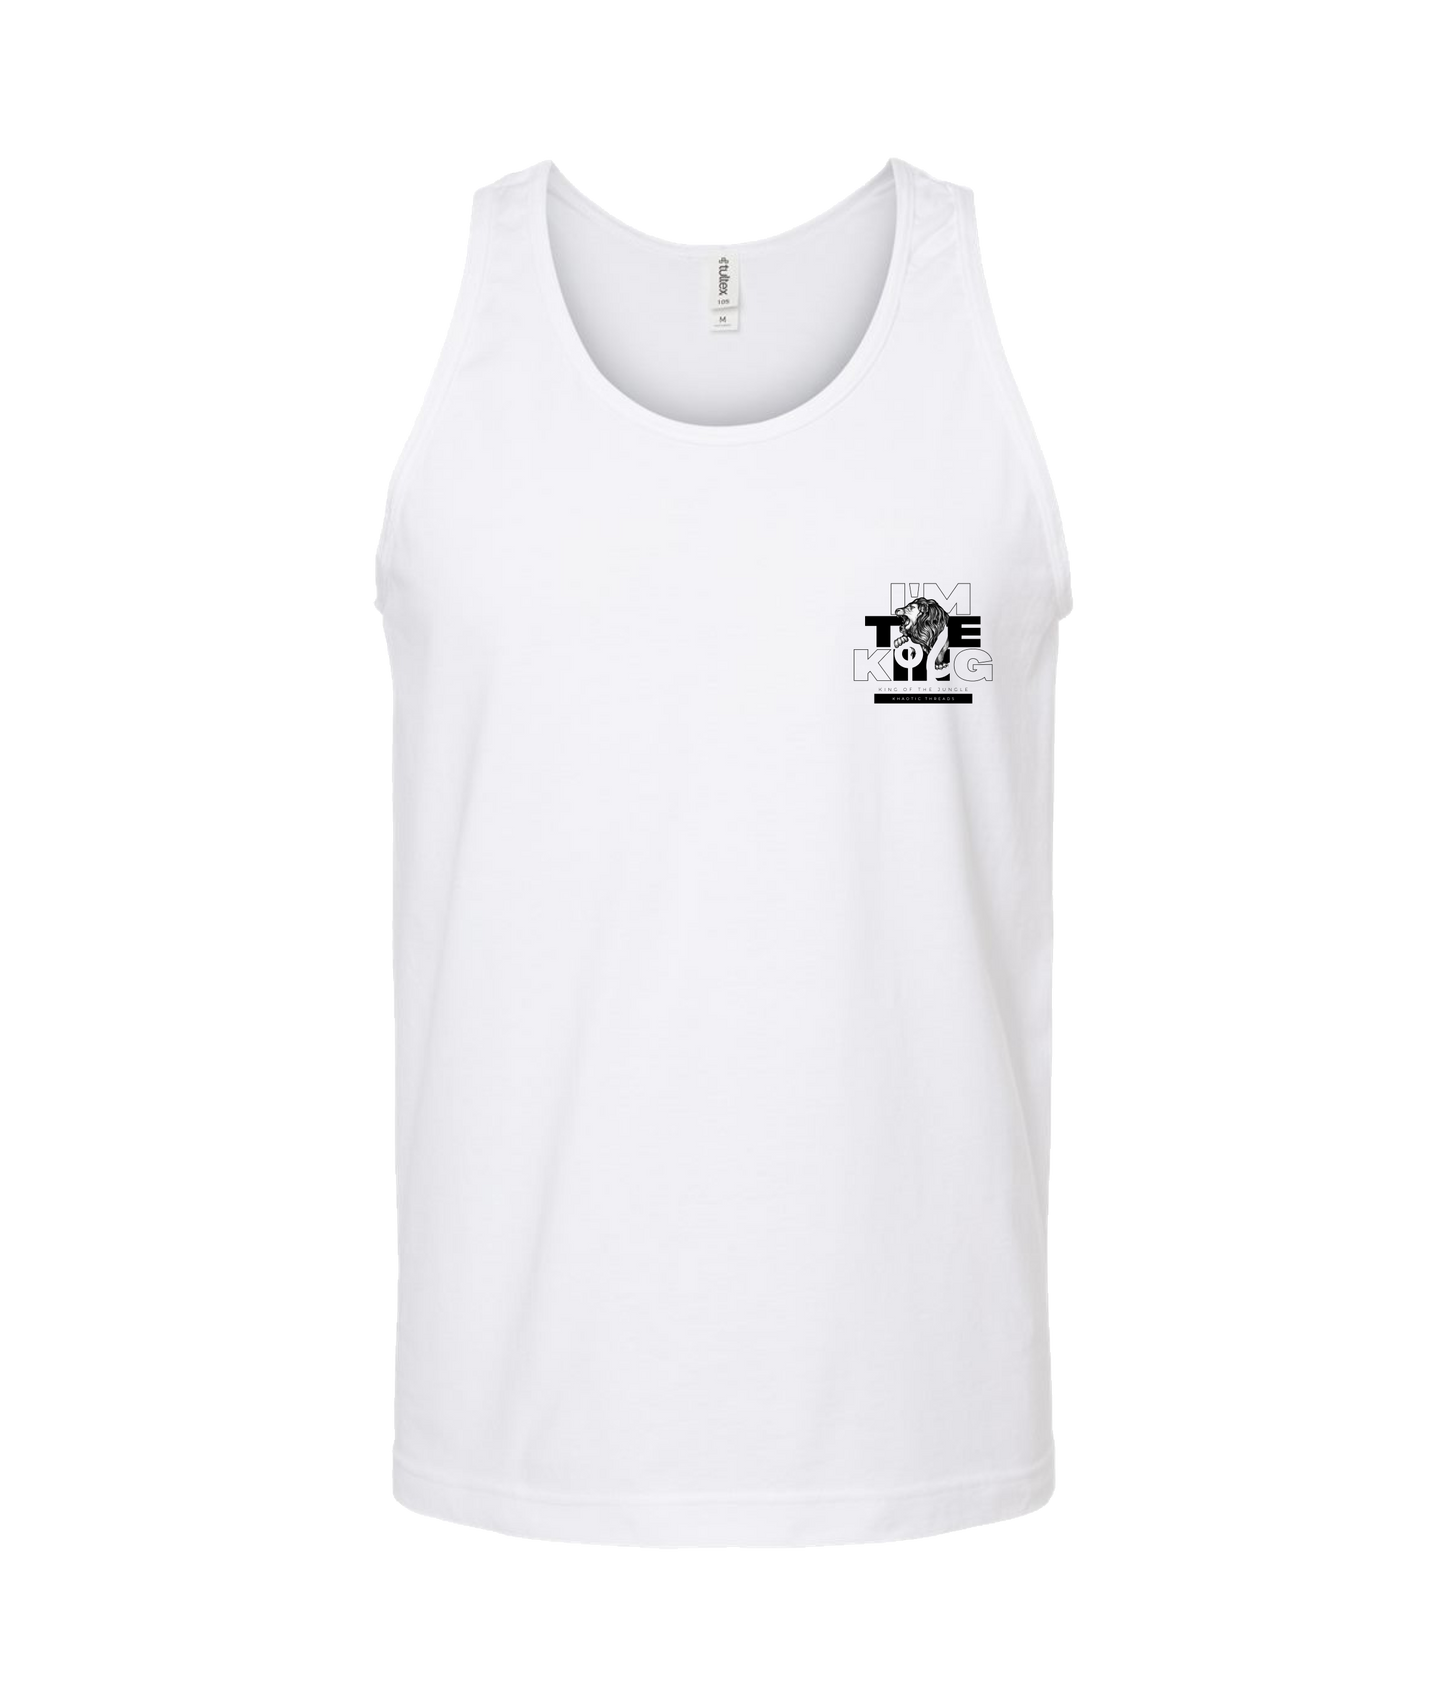 khaotic Threads - I'm The King - White Tank Top